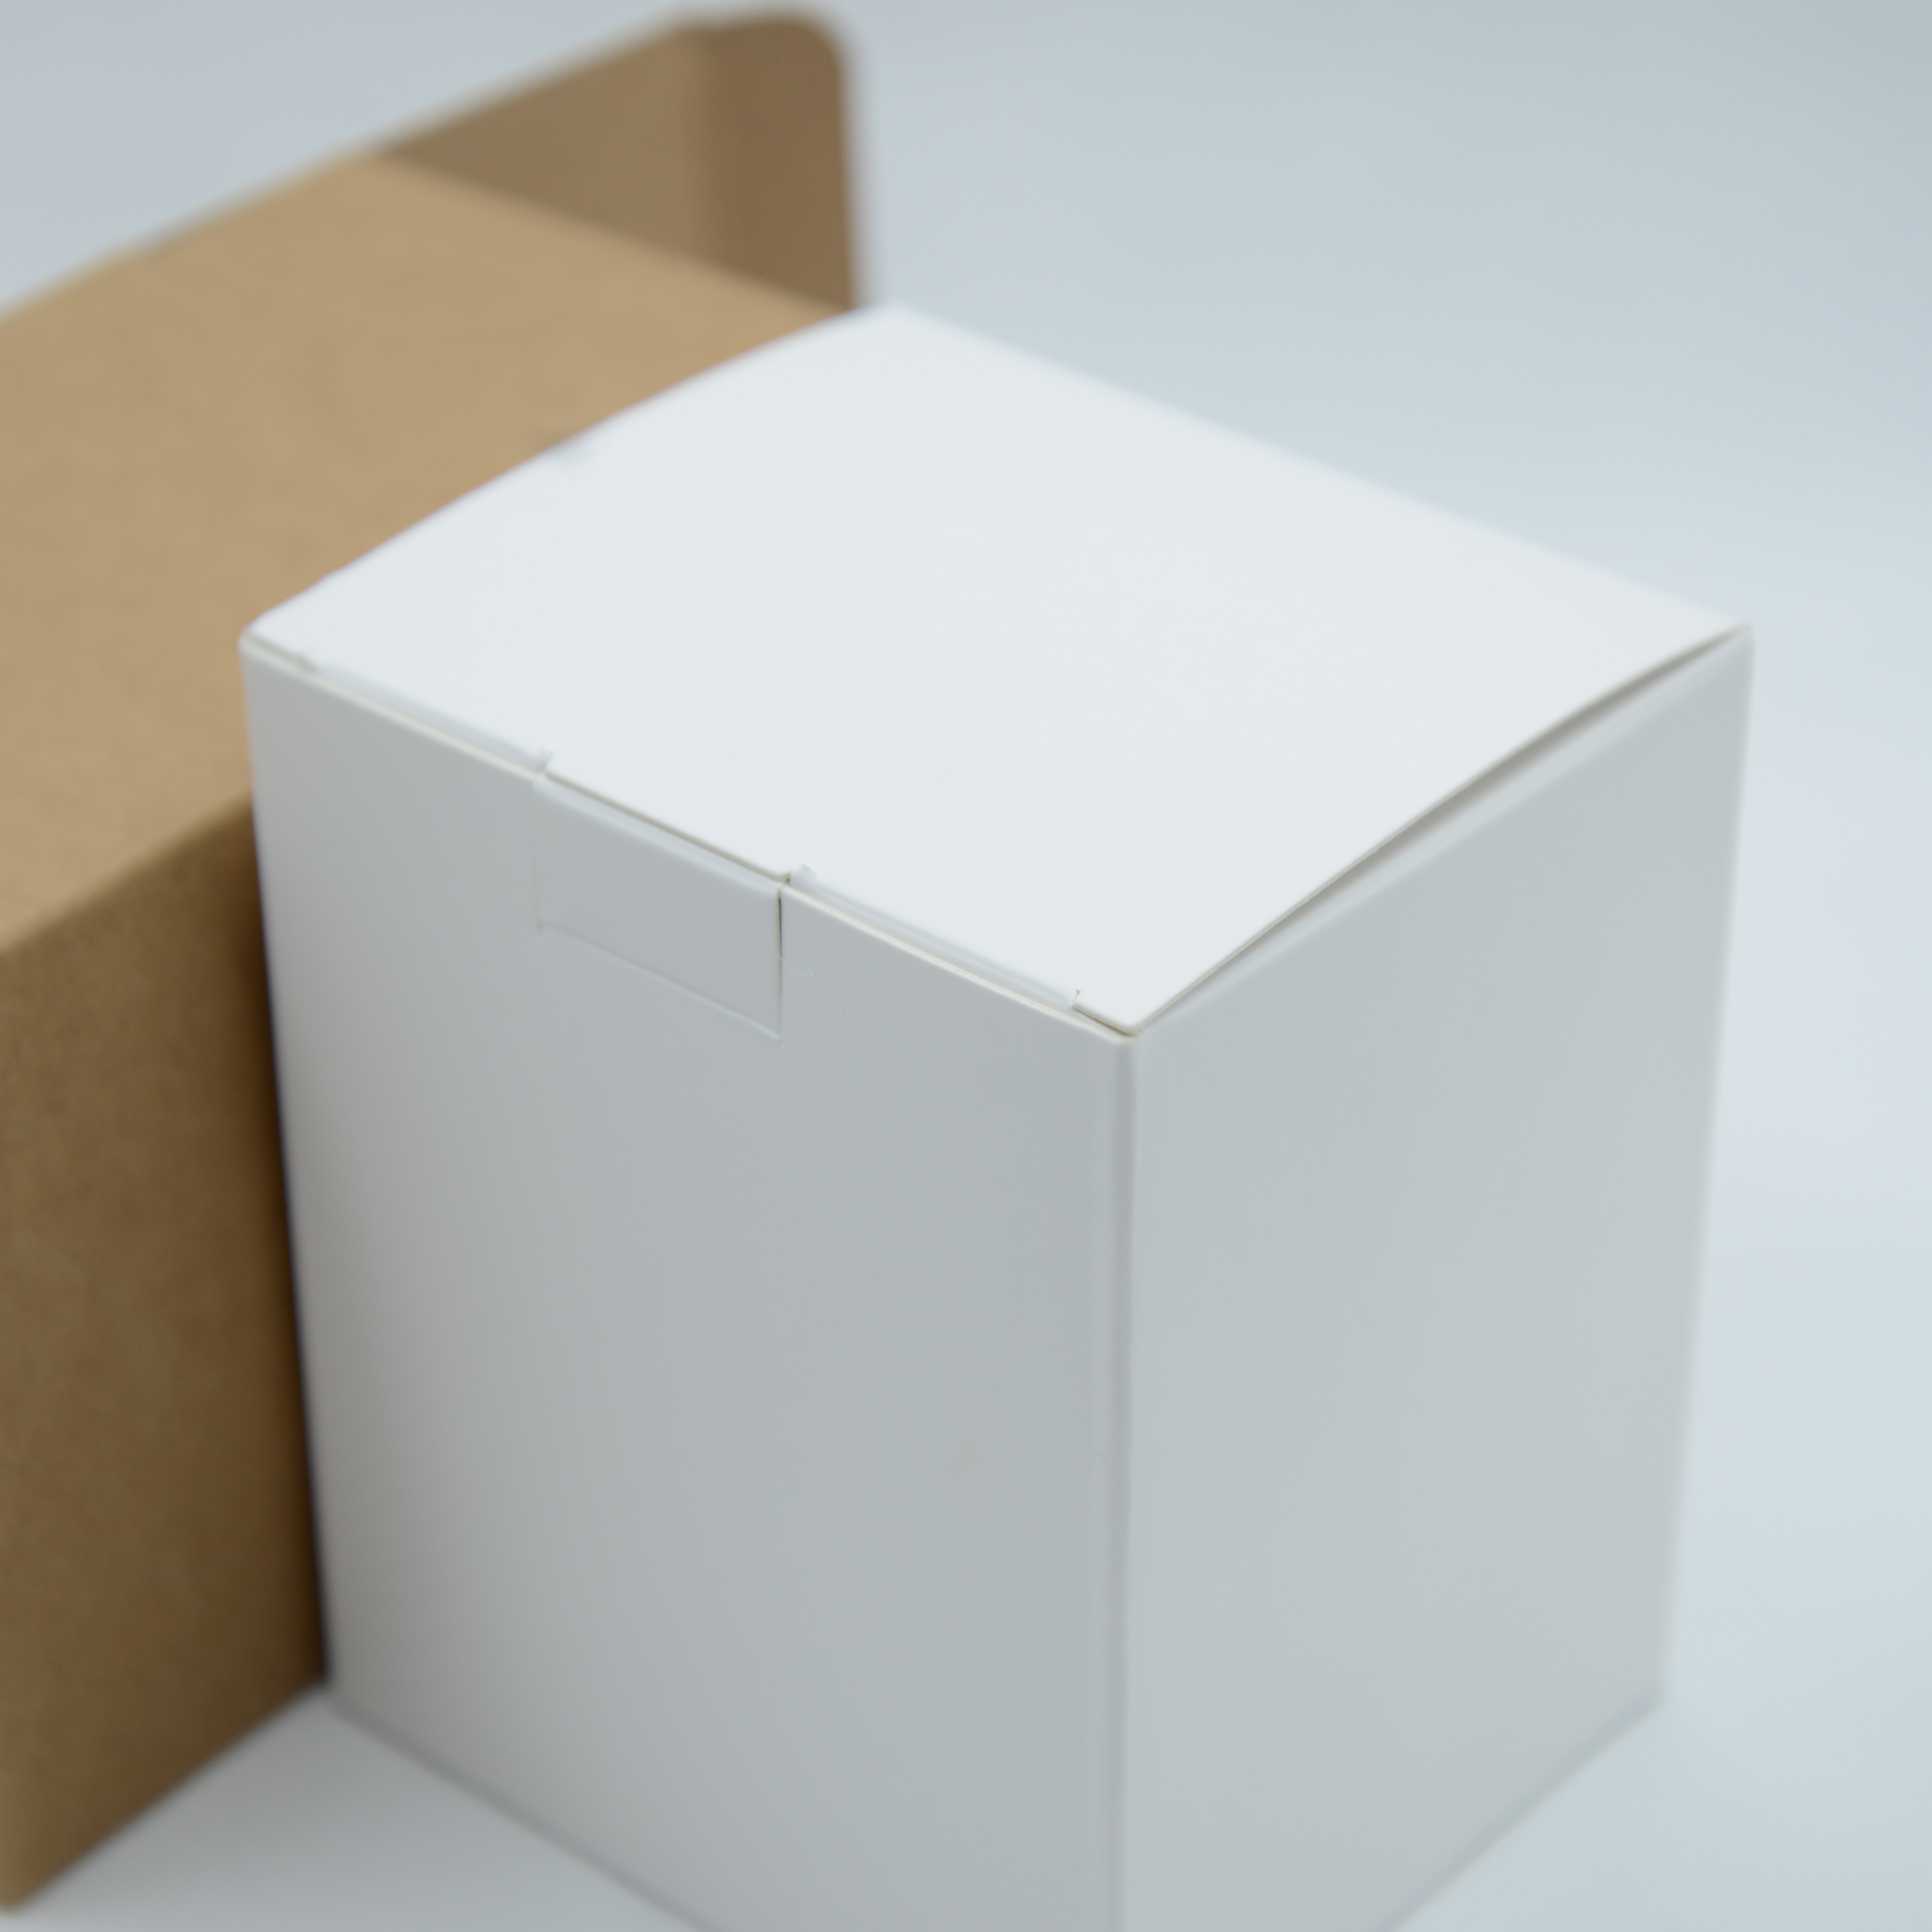 Craft paper box paper cardboard packaging for hanging ear outer box